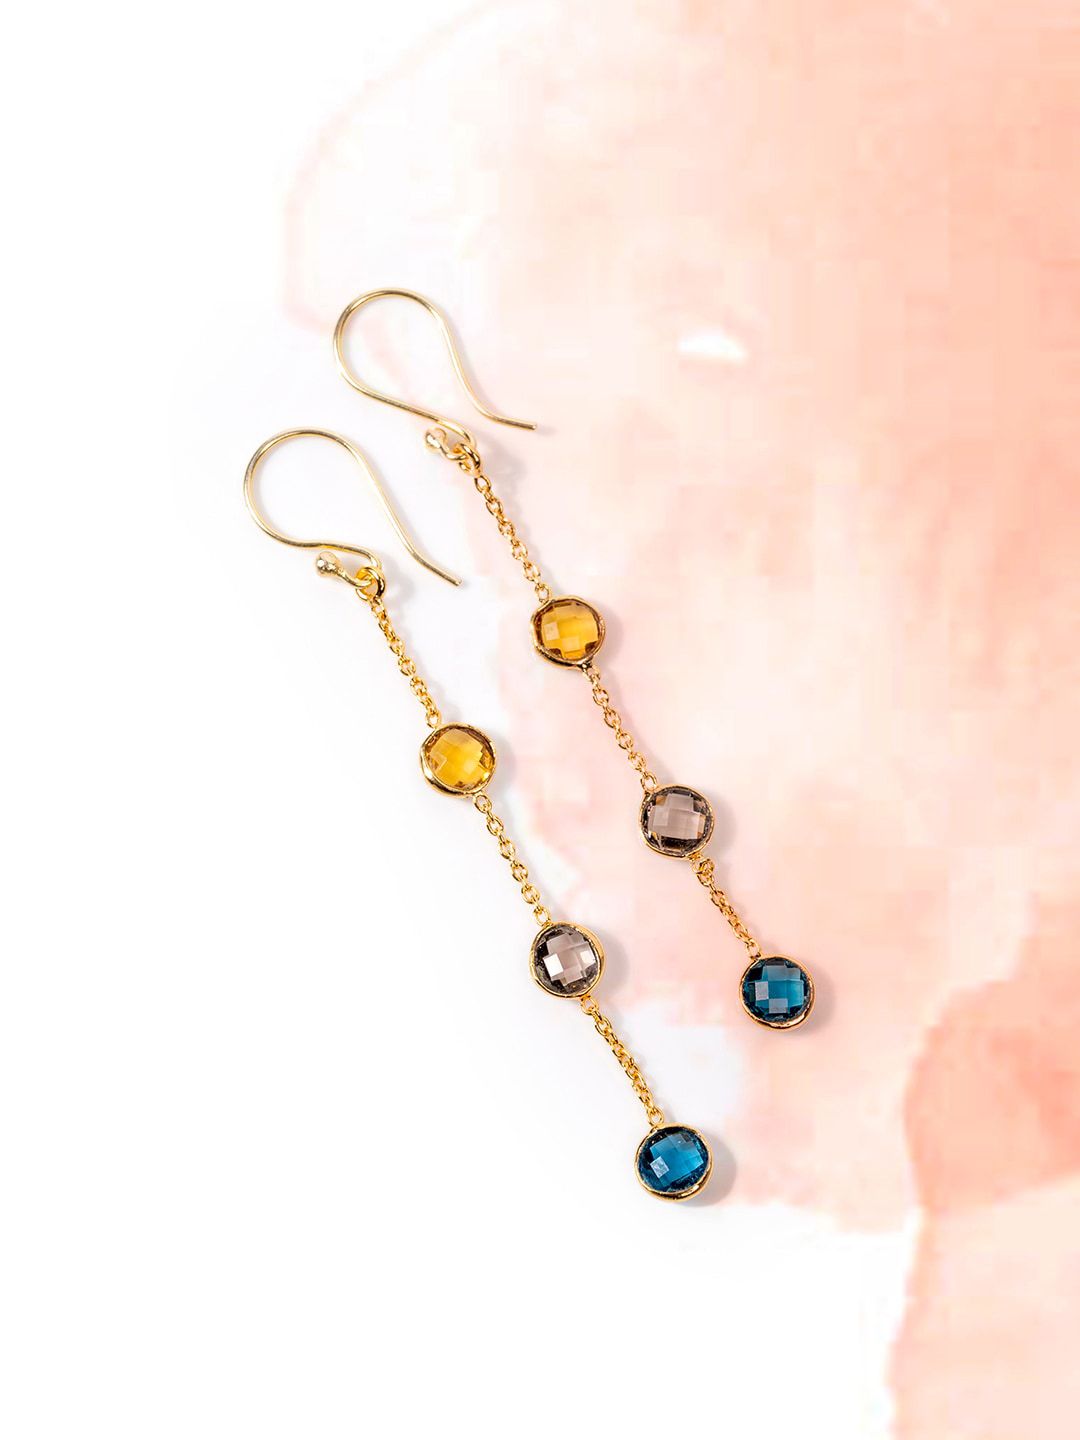 Mikoto by FableStreet Mustard & Blue Gold-Plated Quartz Circular Drop Earrings Price in India